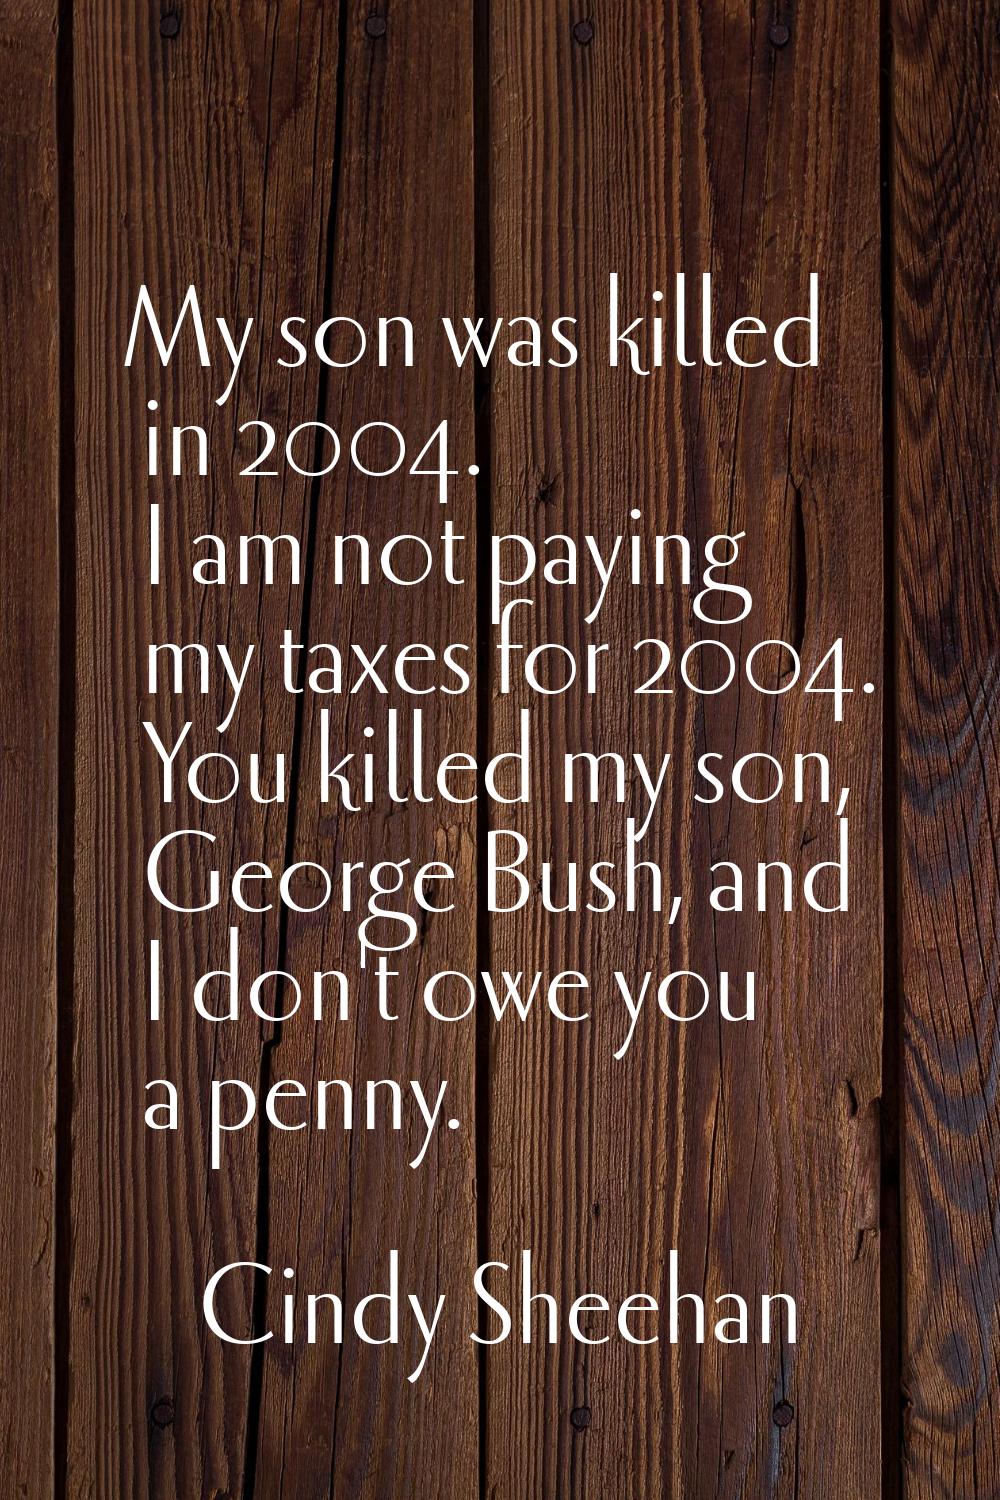 My son was killed in 2004. I am not paying my taxes for 2004. You killed my son, George Bush, and I